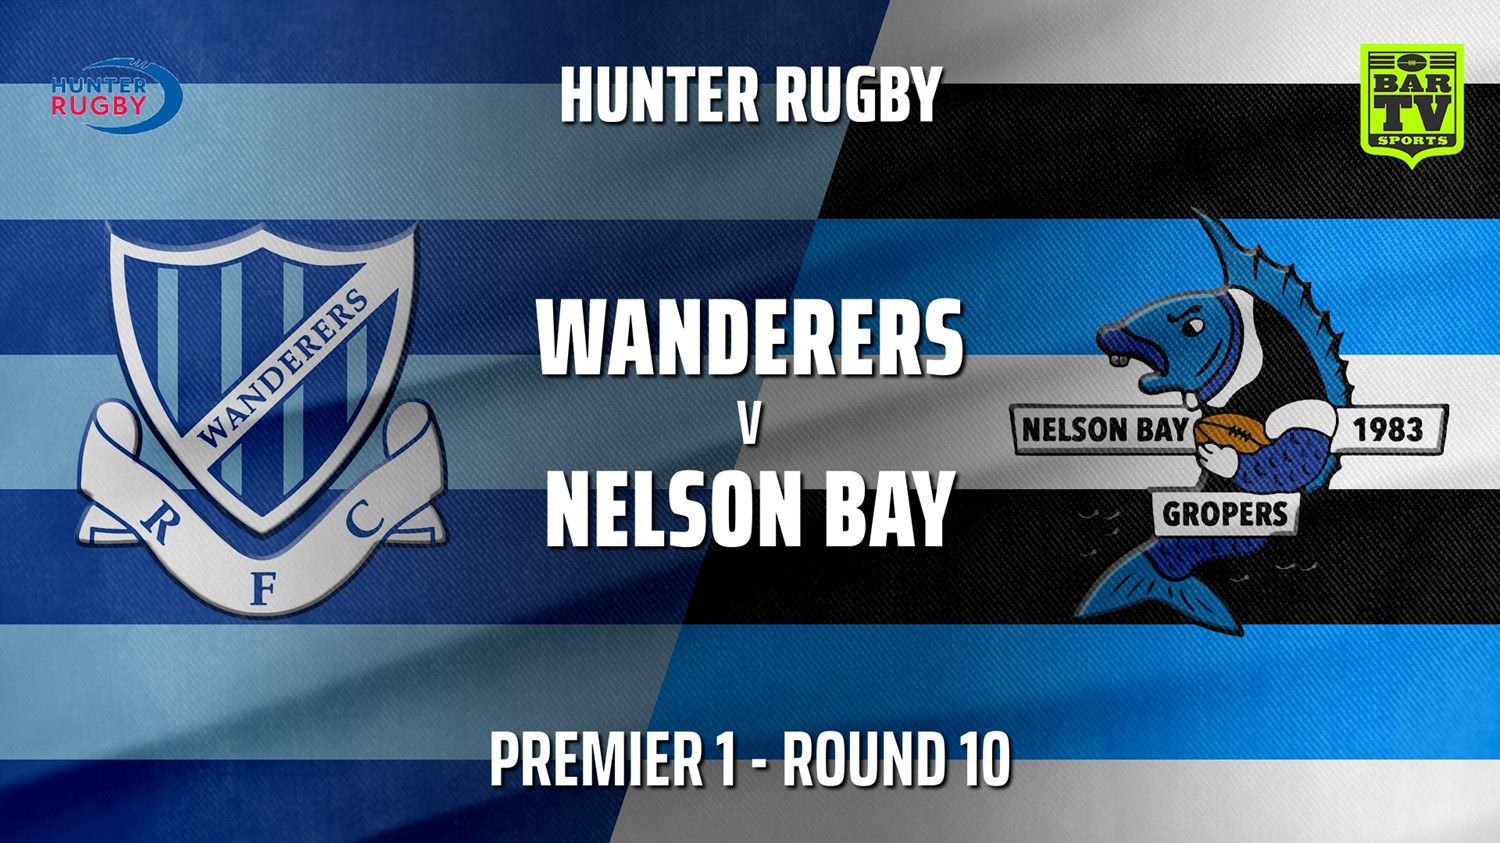 210626-Hunter Rugby Round 10 - Premier 1 - Wanderers v Nelson Bay Gropers Minigame Slate Image